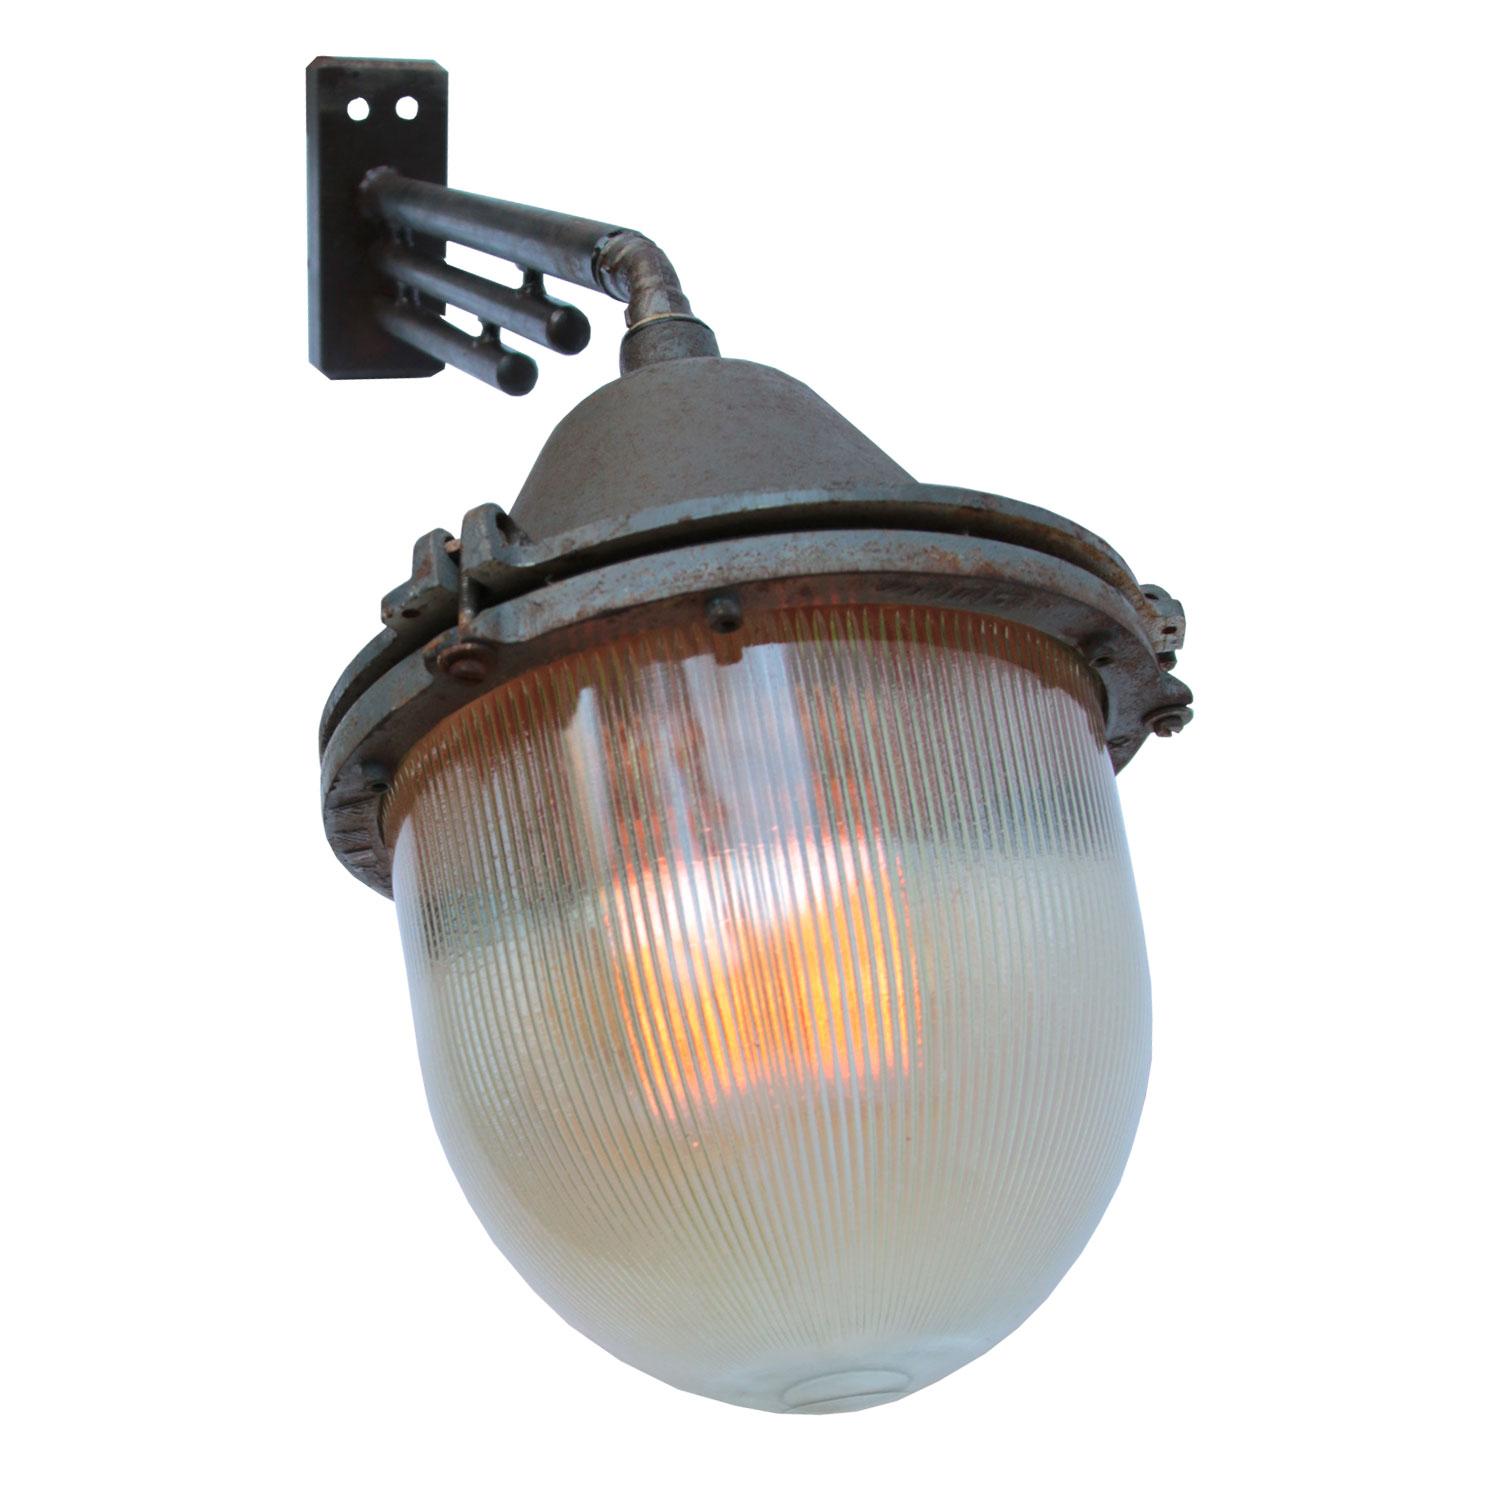 Large Industrial wall light. Cast iron arm with Holophane glass.
Size wall mount: width 8 cm. Height 19 cm. 2 holes to secure.
Shipped in two parts.

11.00 kg / 24.3 lb

Priced per individual item. All lamps have been made suitable by